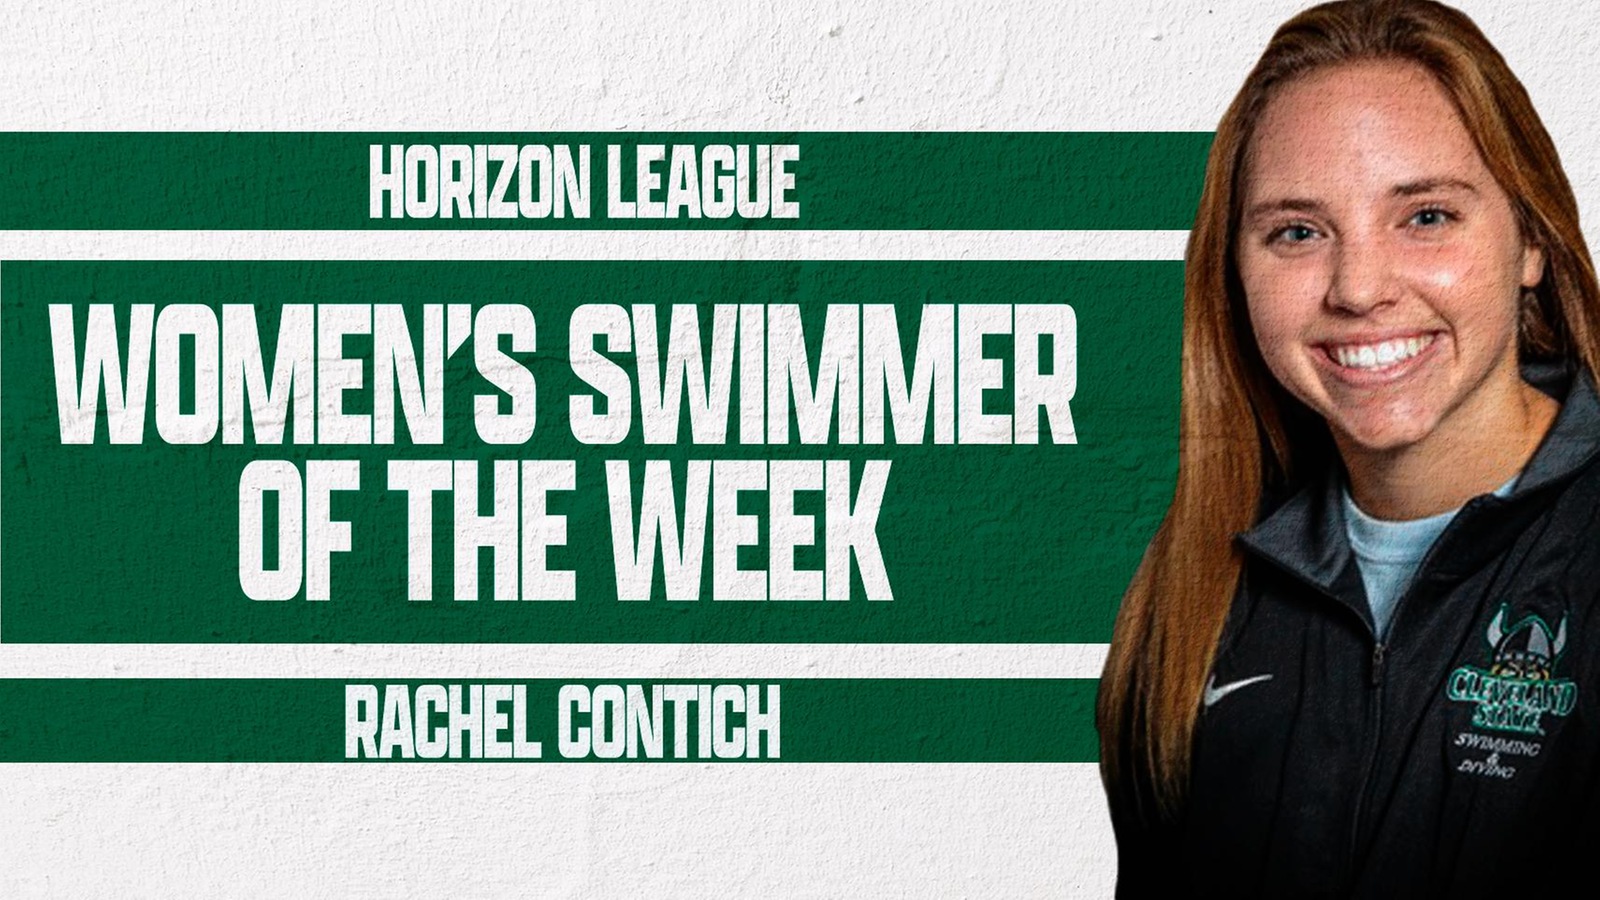 Contich Named #HLSD Women's Swimmer of the Week